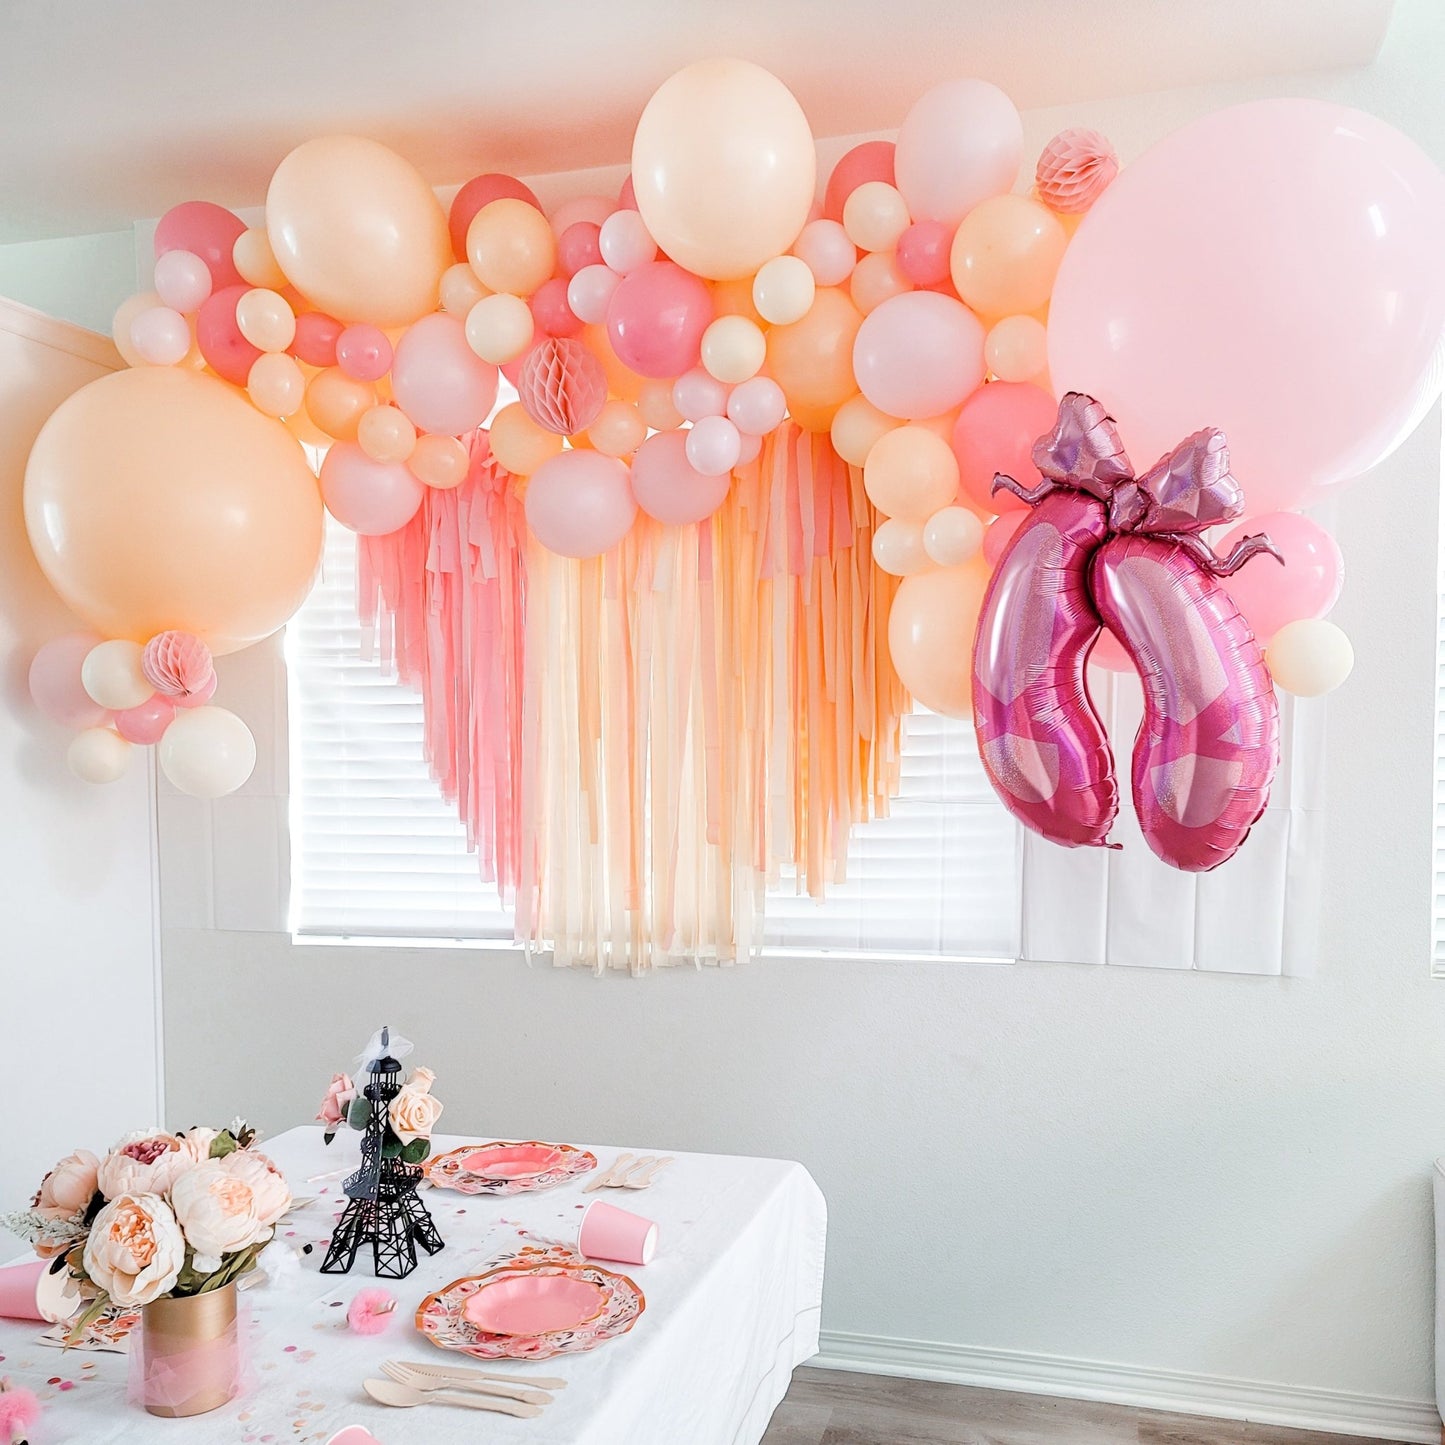 Creamsicle Balloon Arch - Pink Pastel Balloon Garland Kit - Ellie's Party Supply